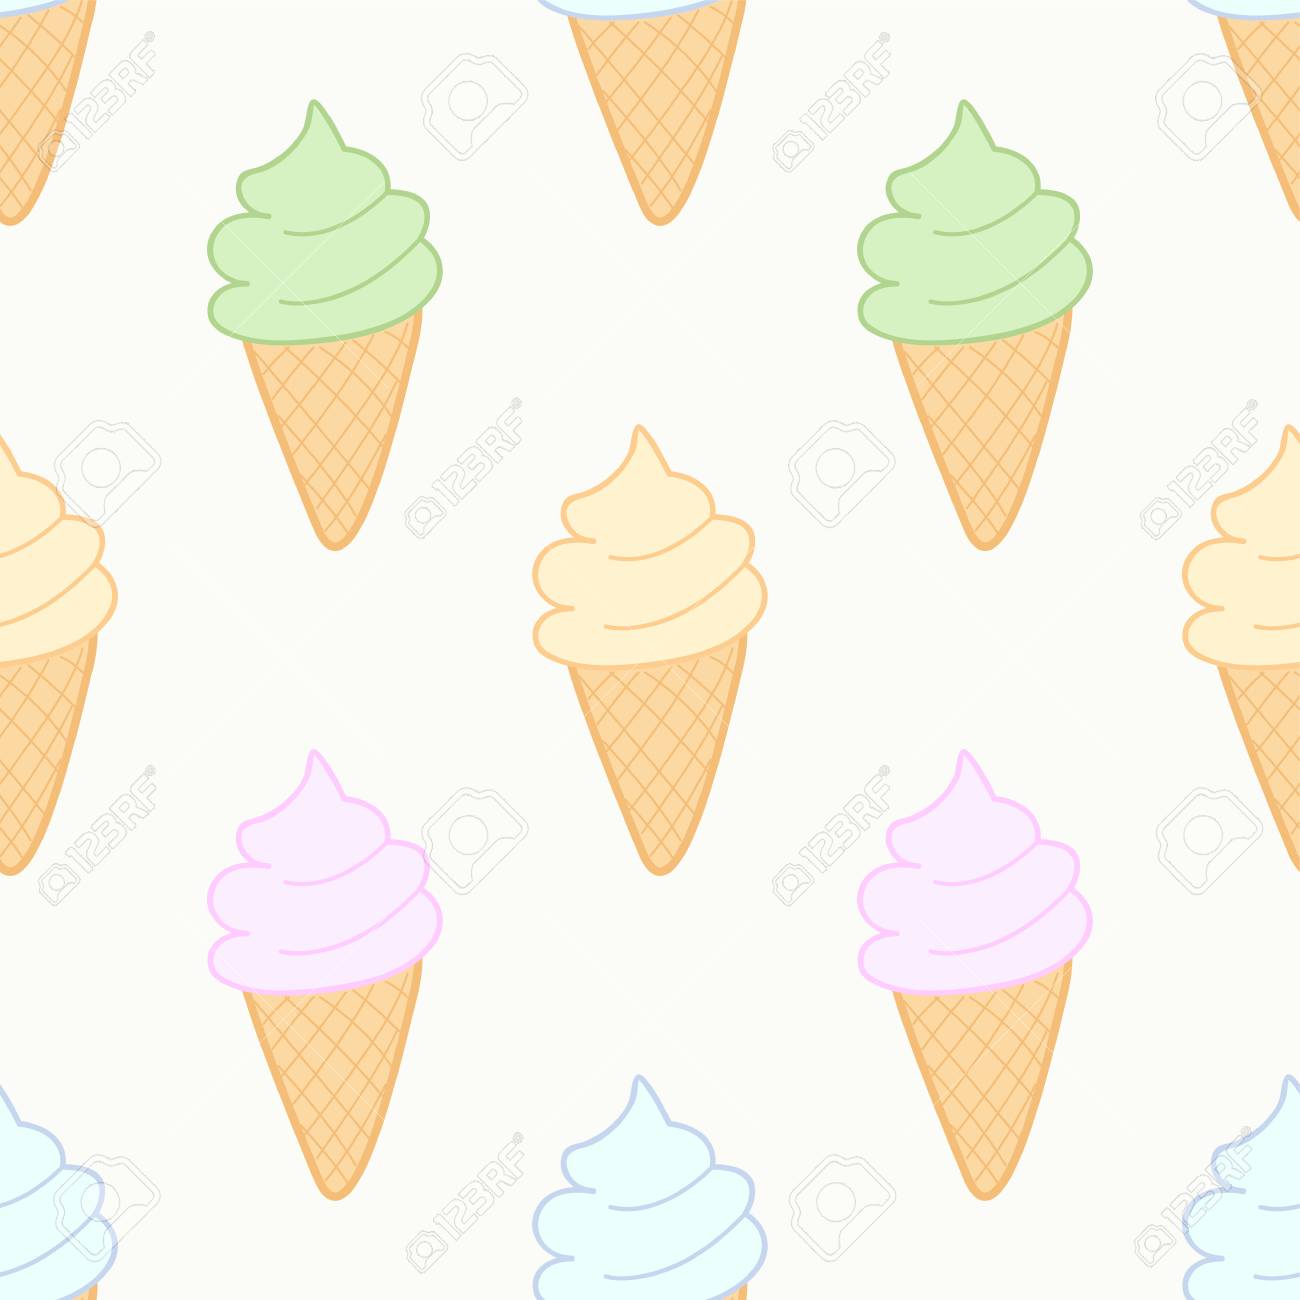 Vector Seamless Background Wallpaper With Ice Cream Royalty